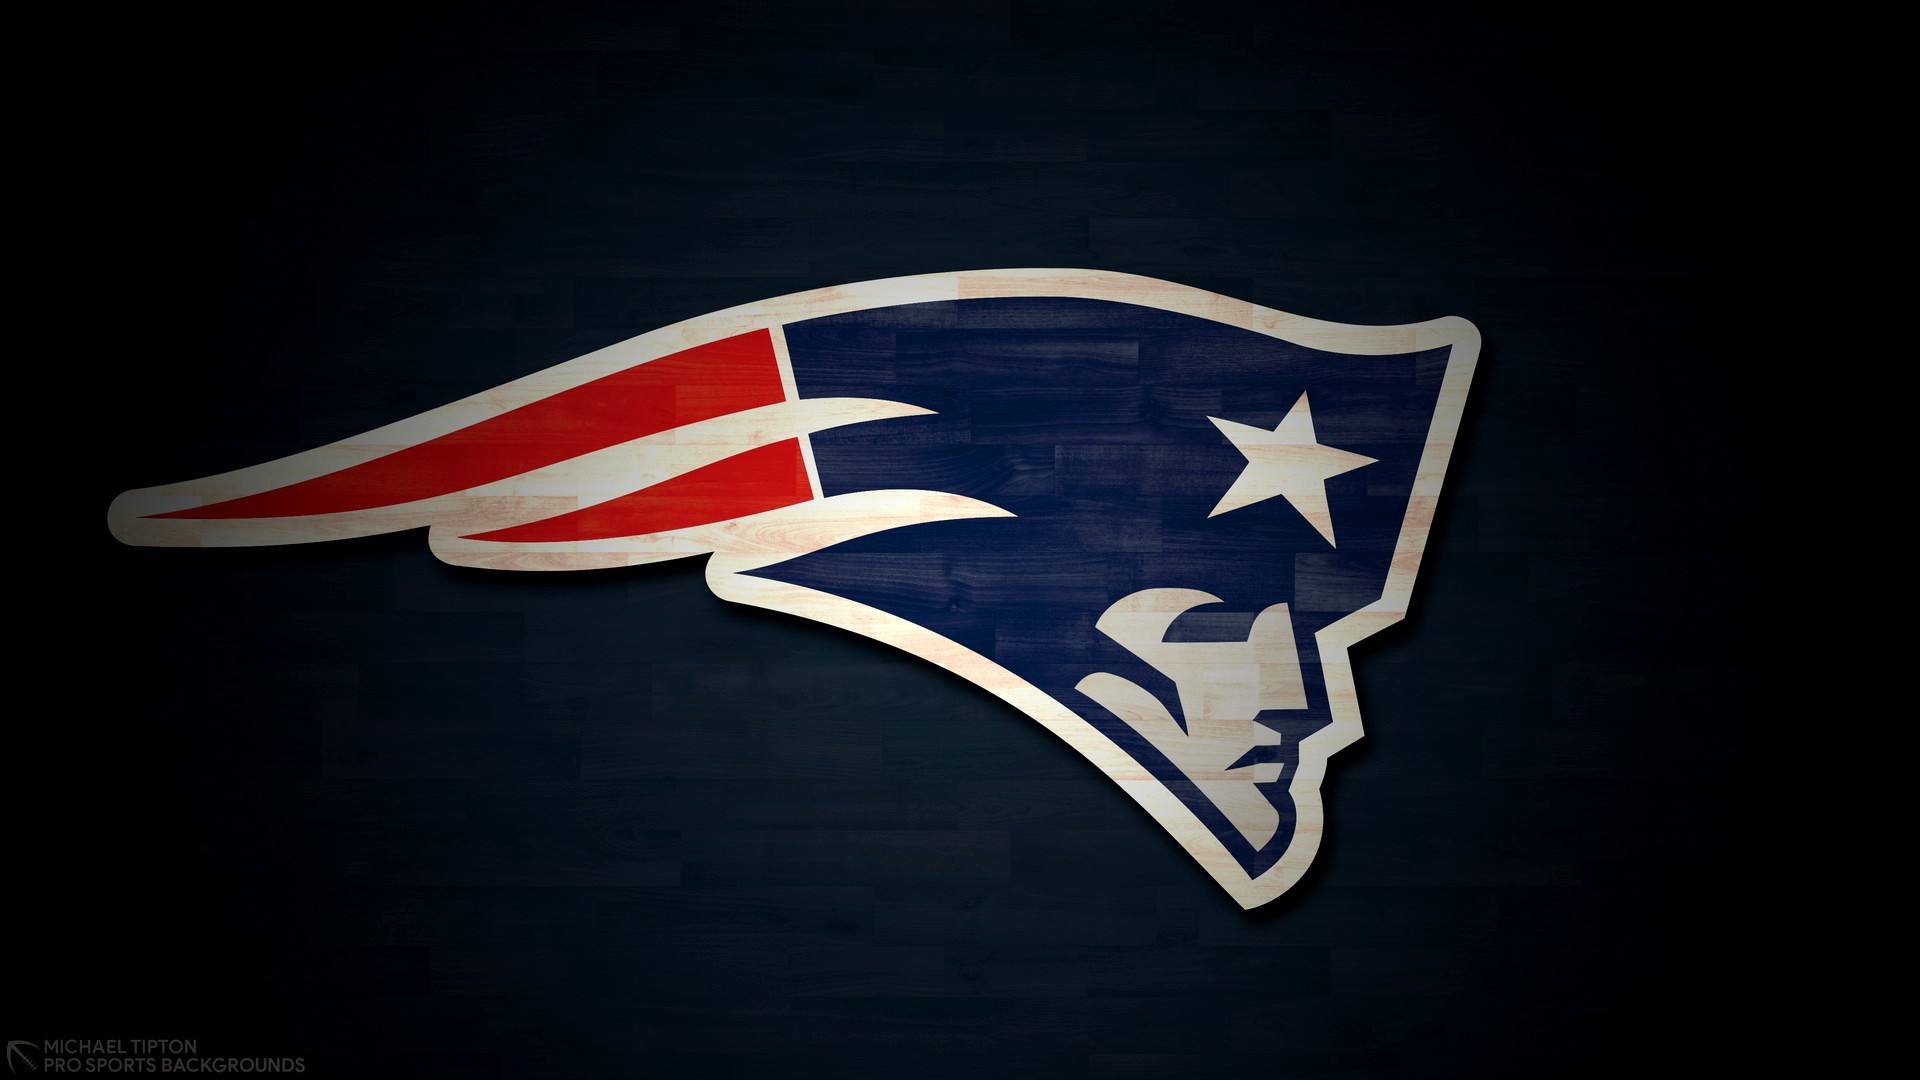 New England Patriots Wallpaper For Desktop with high-resolution 1920x1080 pixel. You can use and set as wallpaper for Notebook Screensavers, Mac Wallpapers, Mobile Home Screen, iPhone or Android Phones Lock Screen